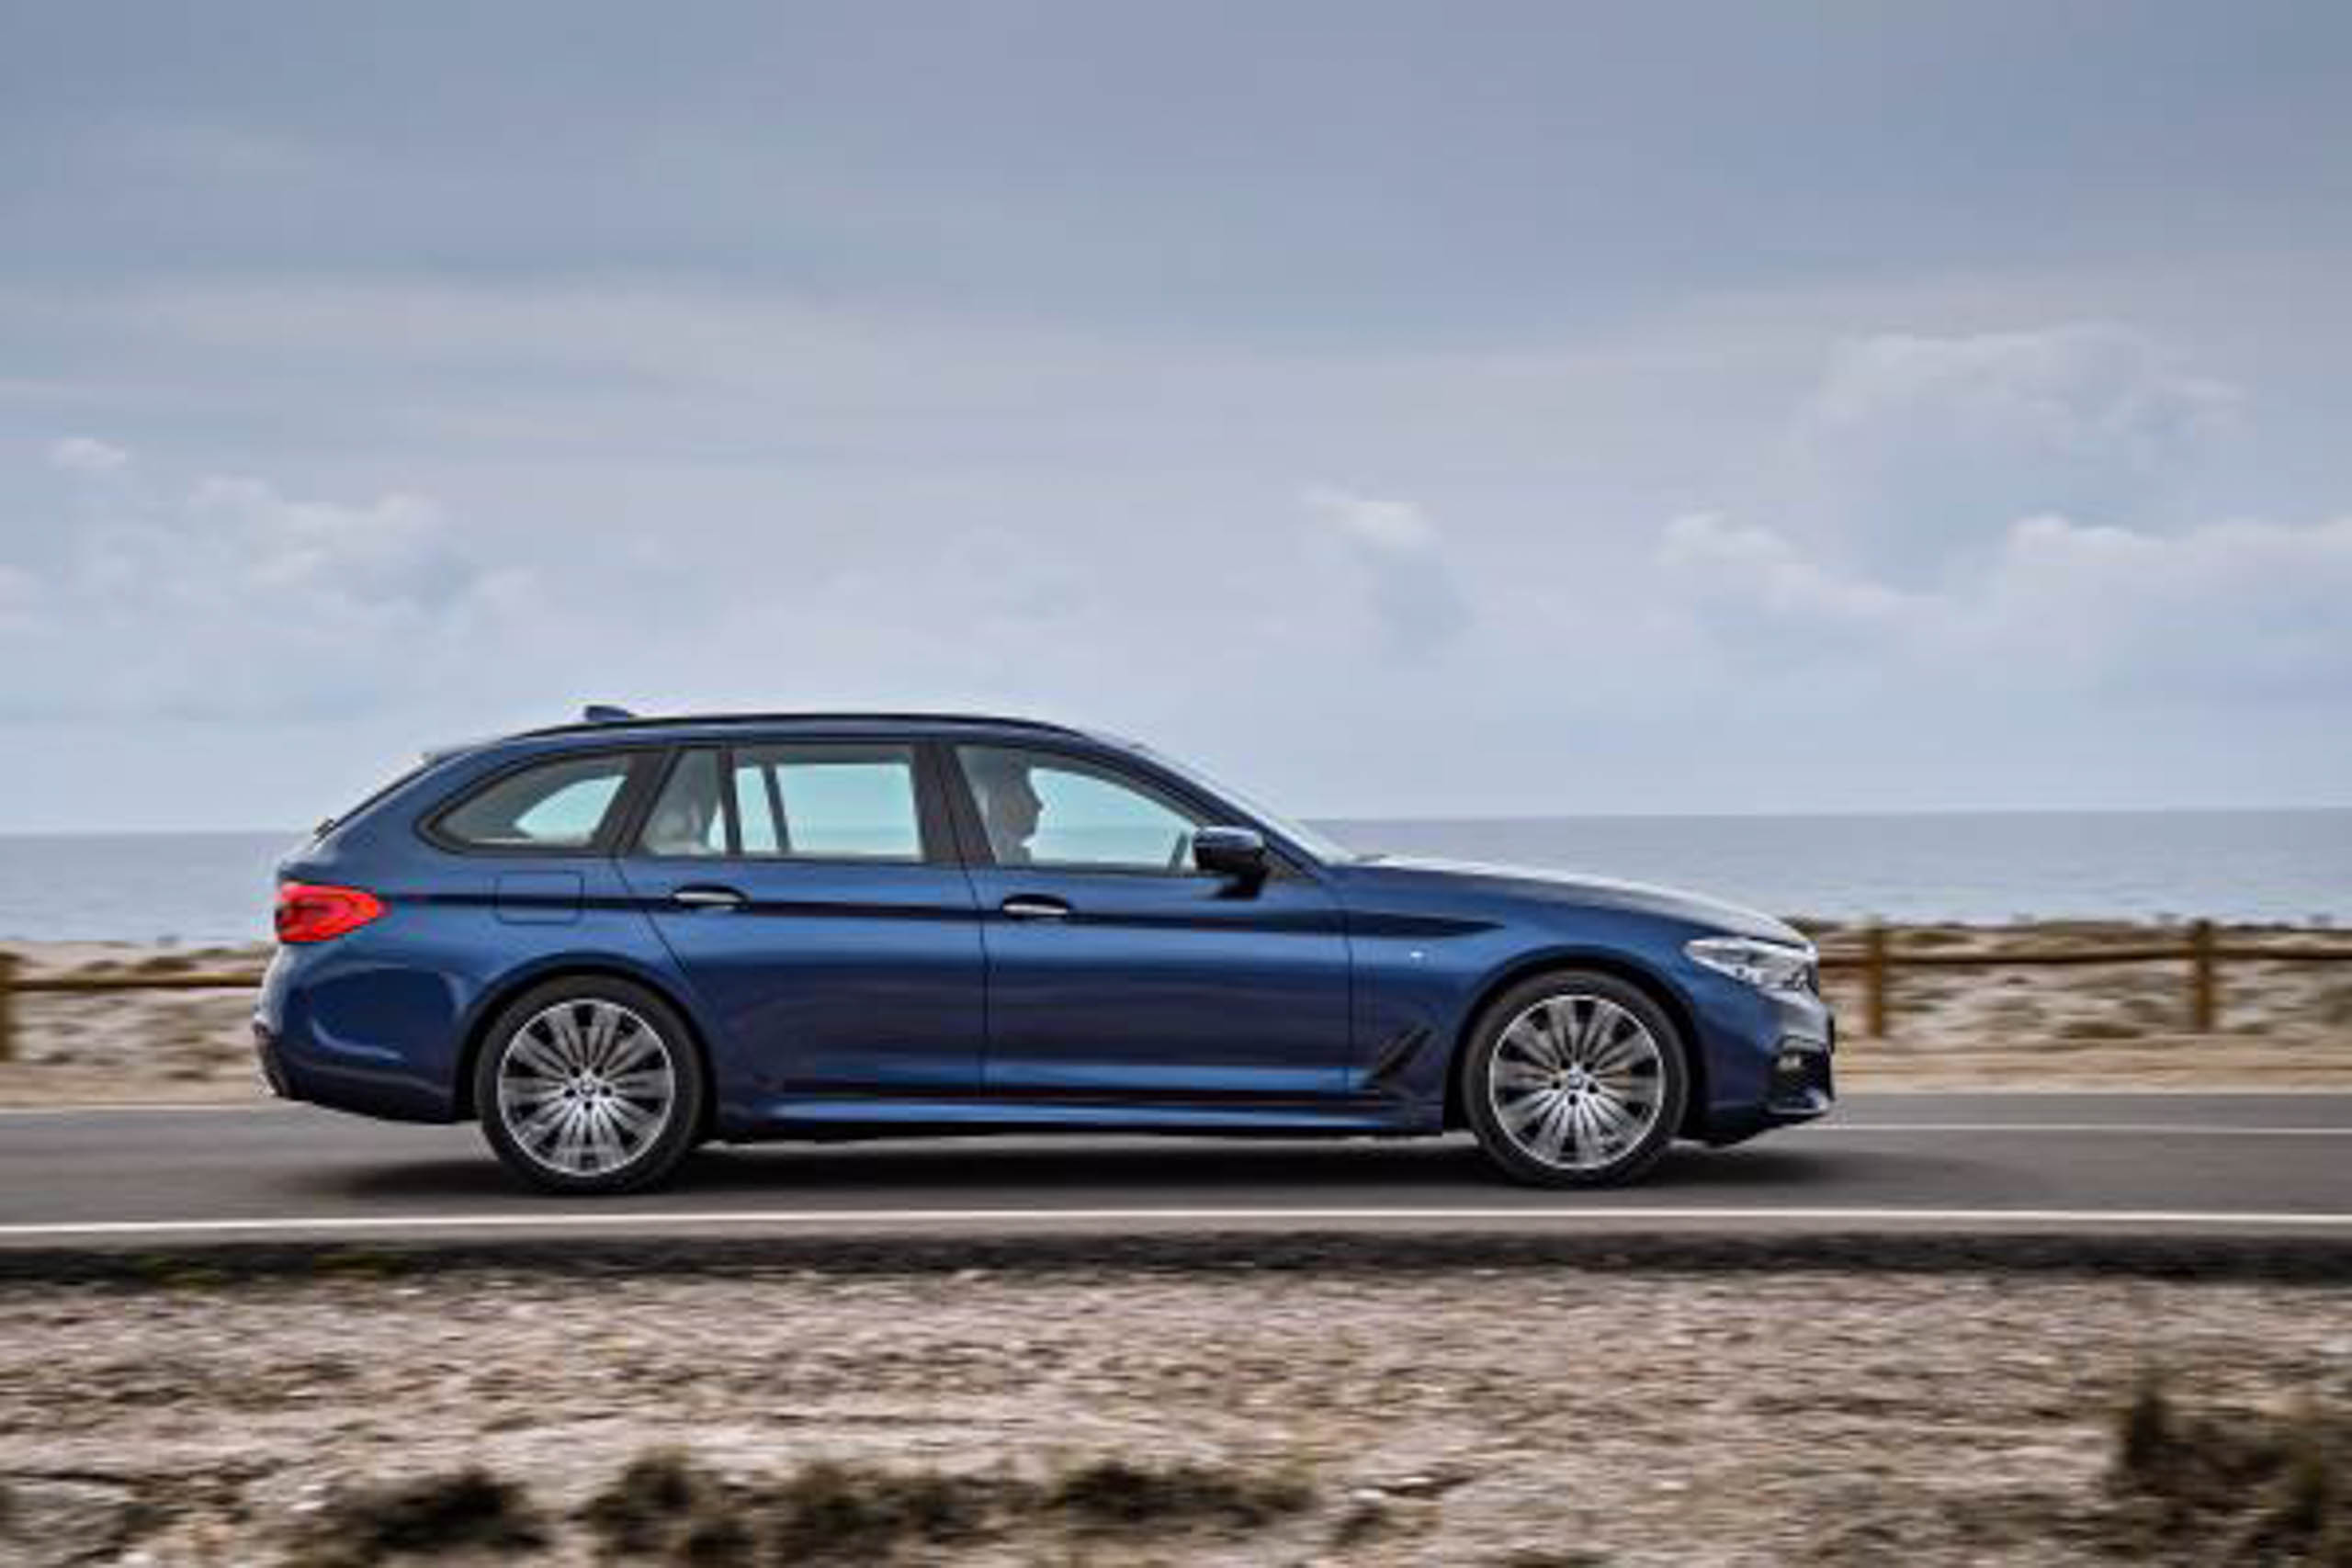 BMW G31 5 Series Touring Images, pictures, gallery